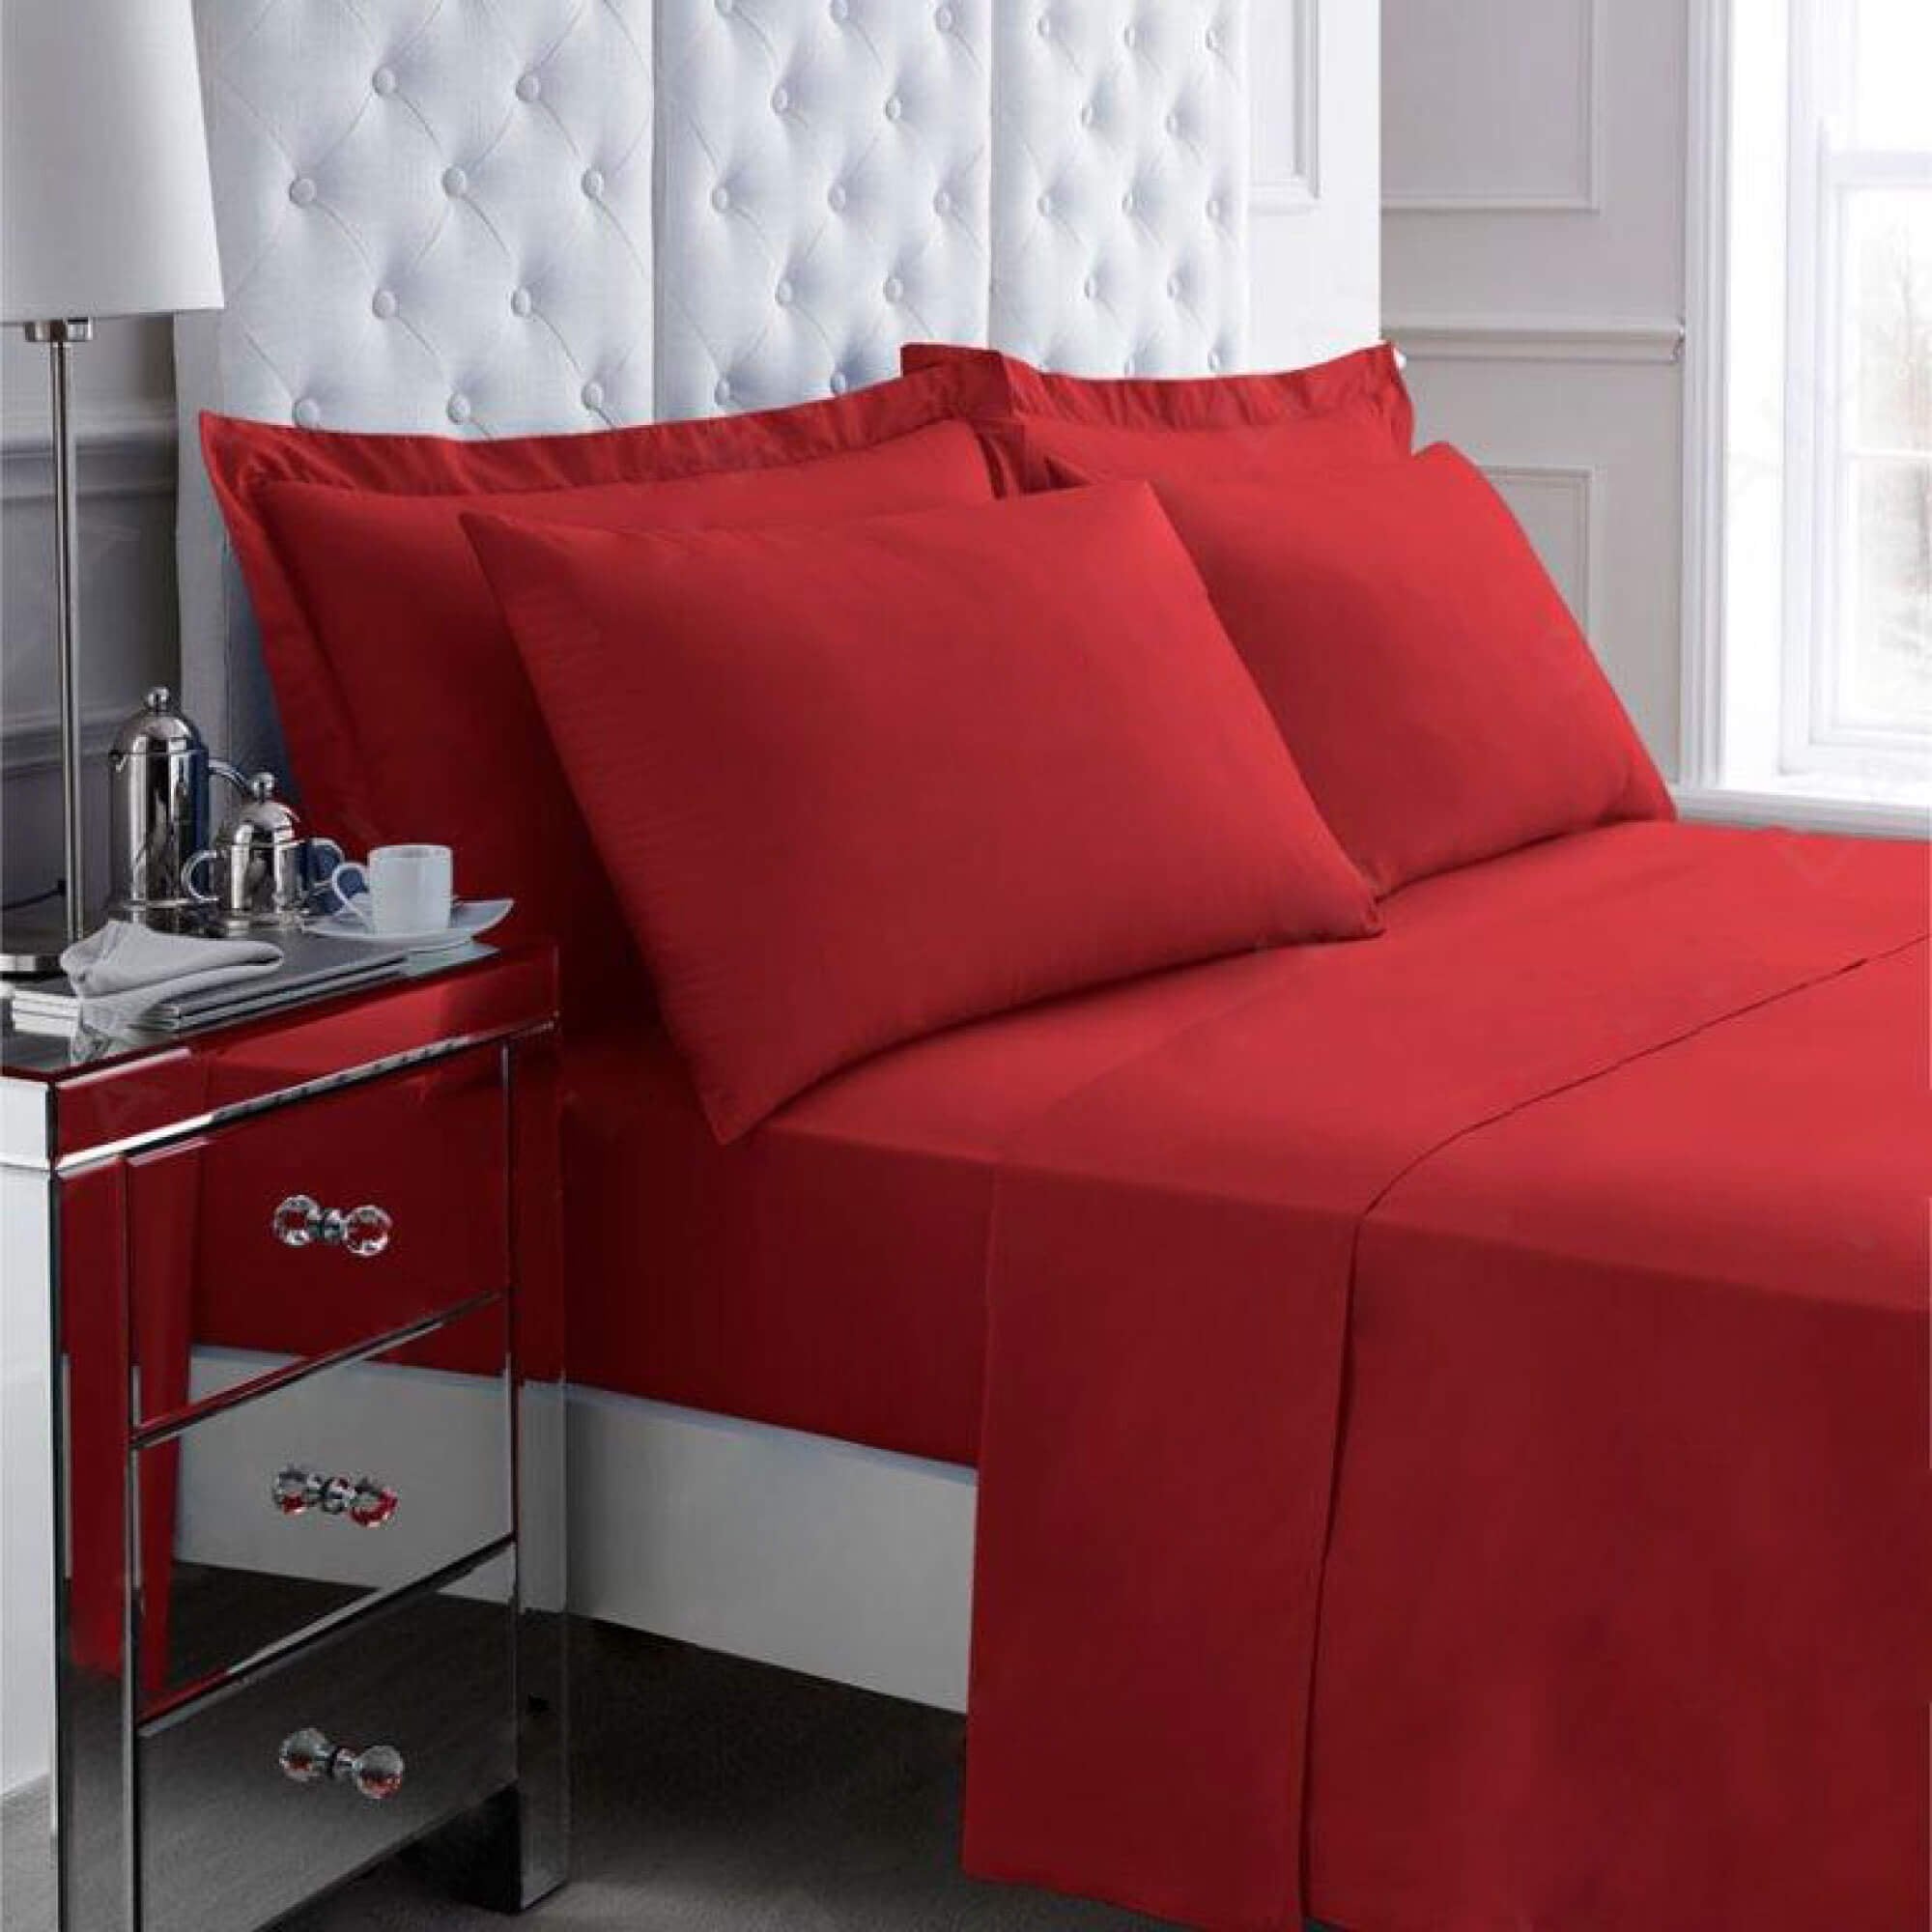 Non Iron Percale Bedding Sheet Range - Red - Double Fitted - TJ Hughes